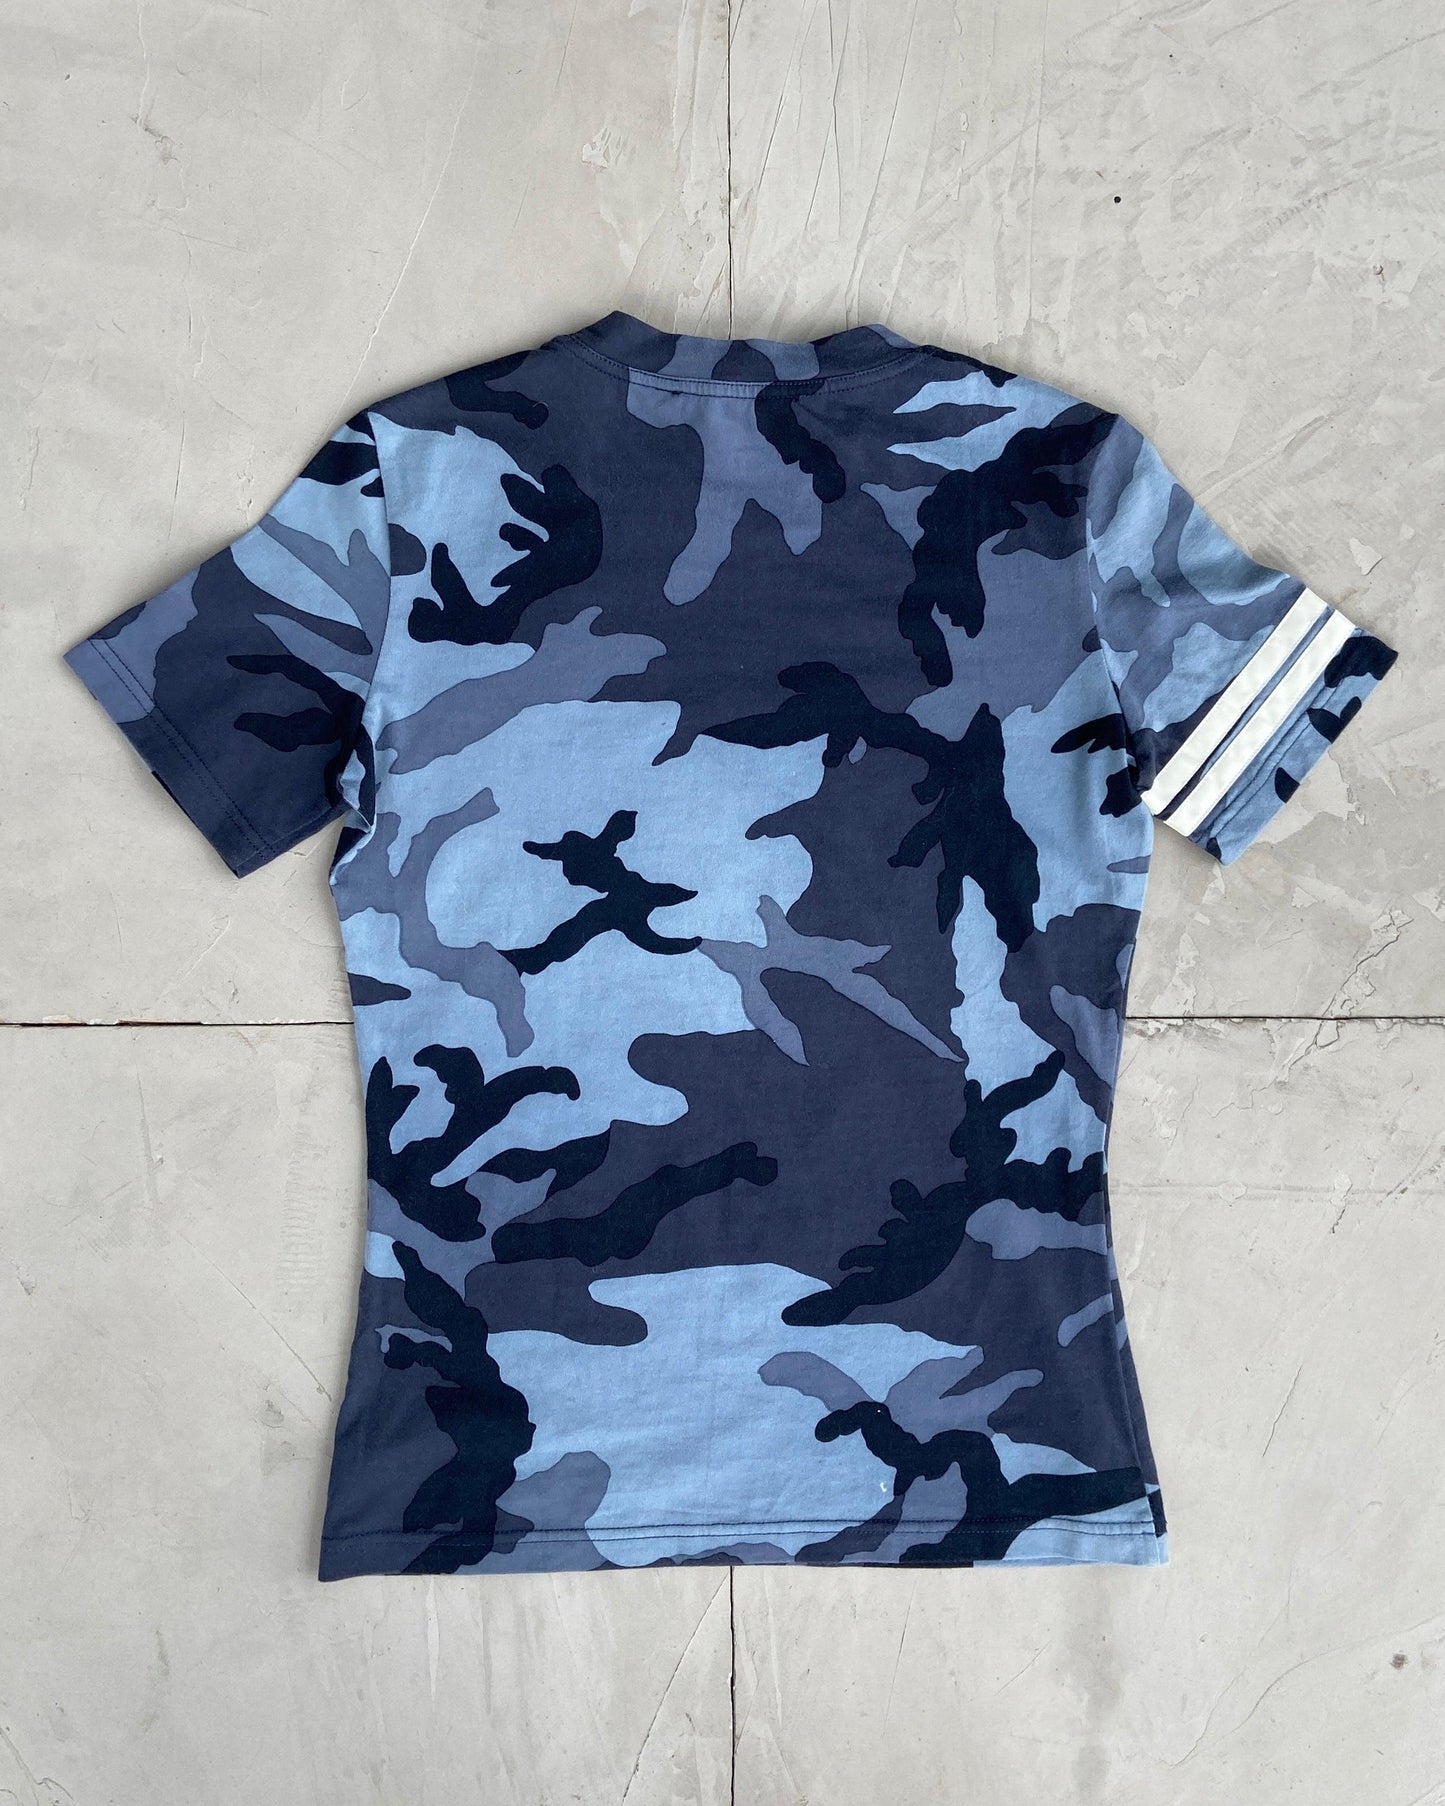 CHRISTIAN DIOR 2000'S BLUE CAMO TOP - S/M - Known Source